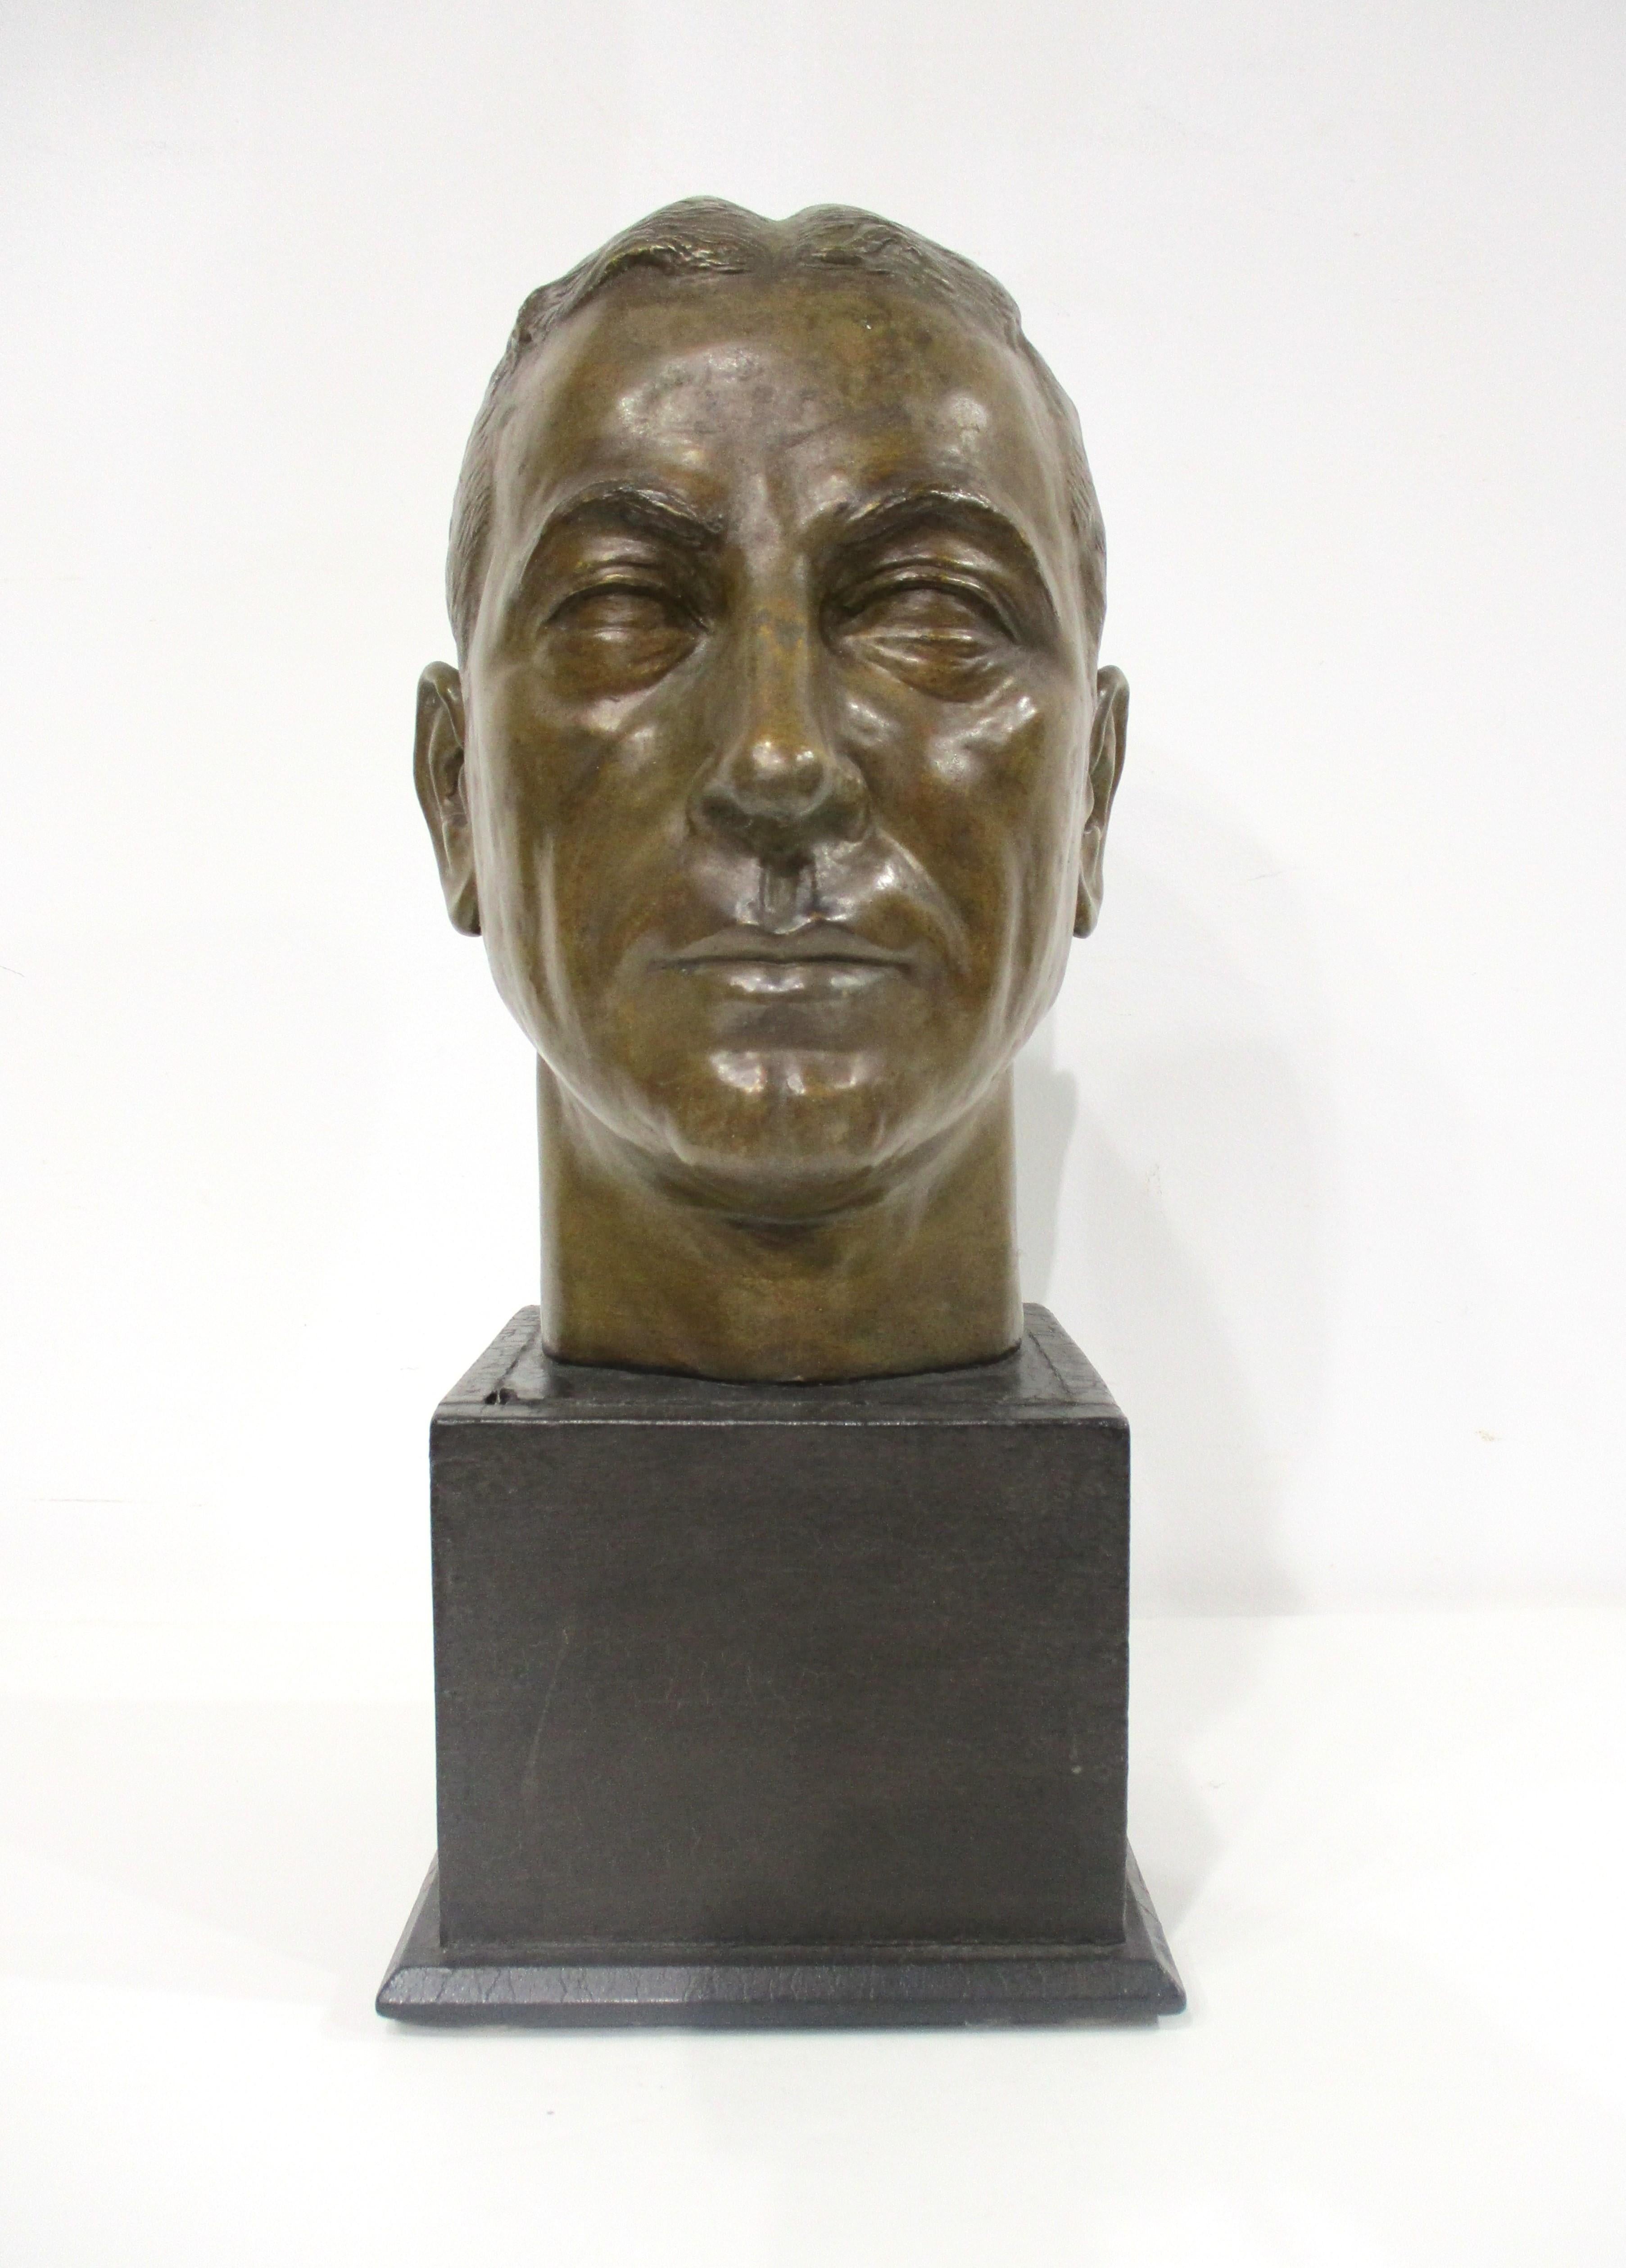 A very well crafted cast plaster mid century male head with a bronze styled toned rub which looks great . Great strong details to the face and mounted on a satin black wooden base from a unknown artist and who the bust represents . Perfect for a